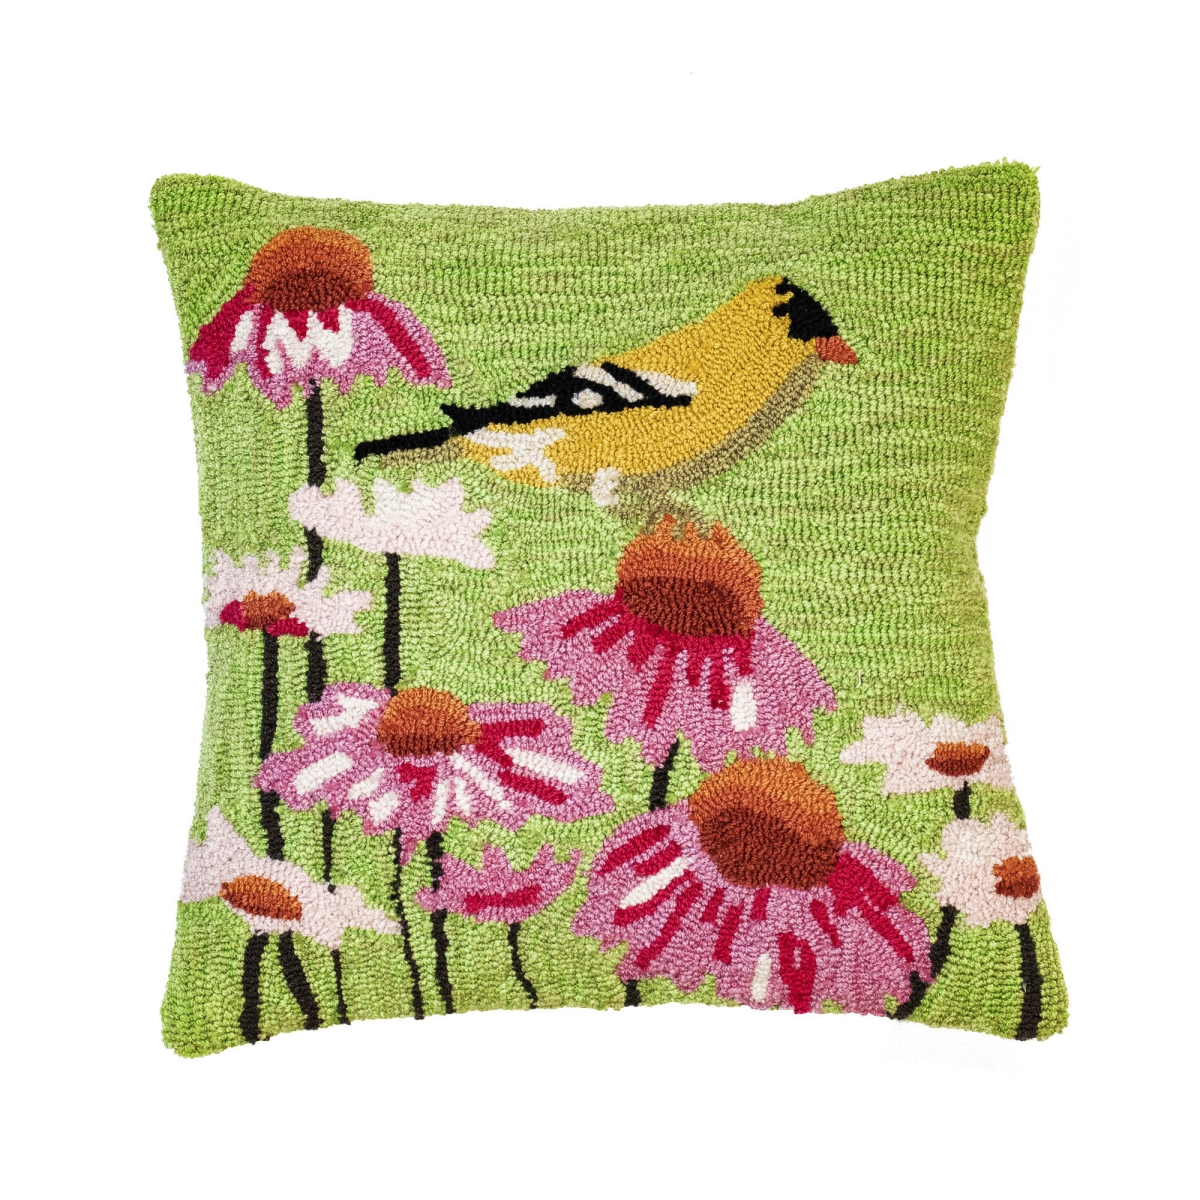 Trans-ocean Imports 7fp8s439006 18 In. Square Liora Manne Frontporch Goldfinch Indoor & Outdoor Pillow - Green